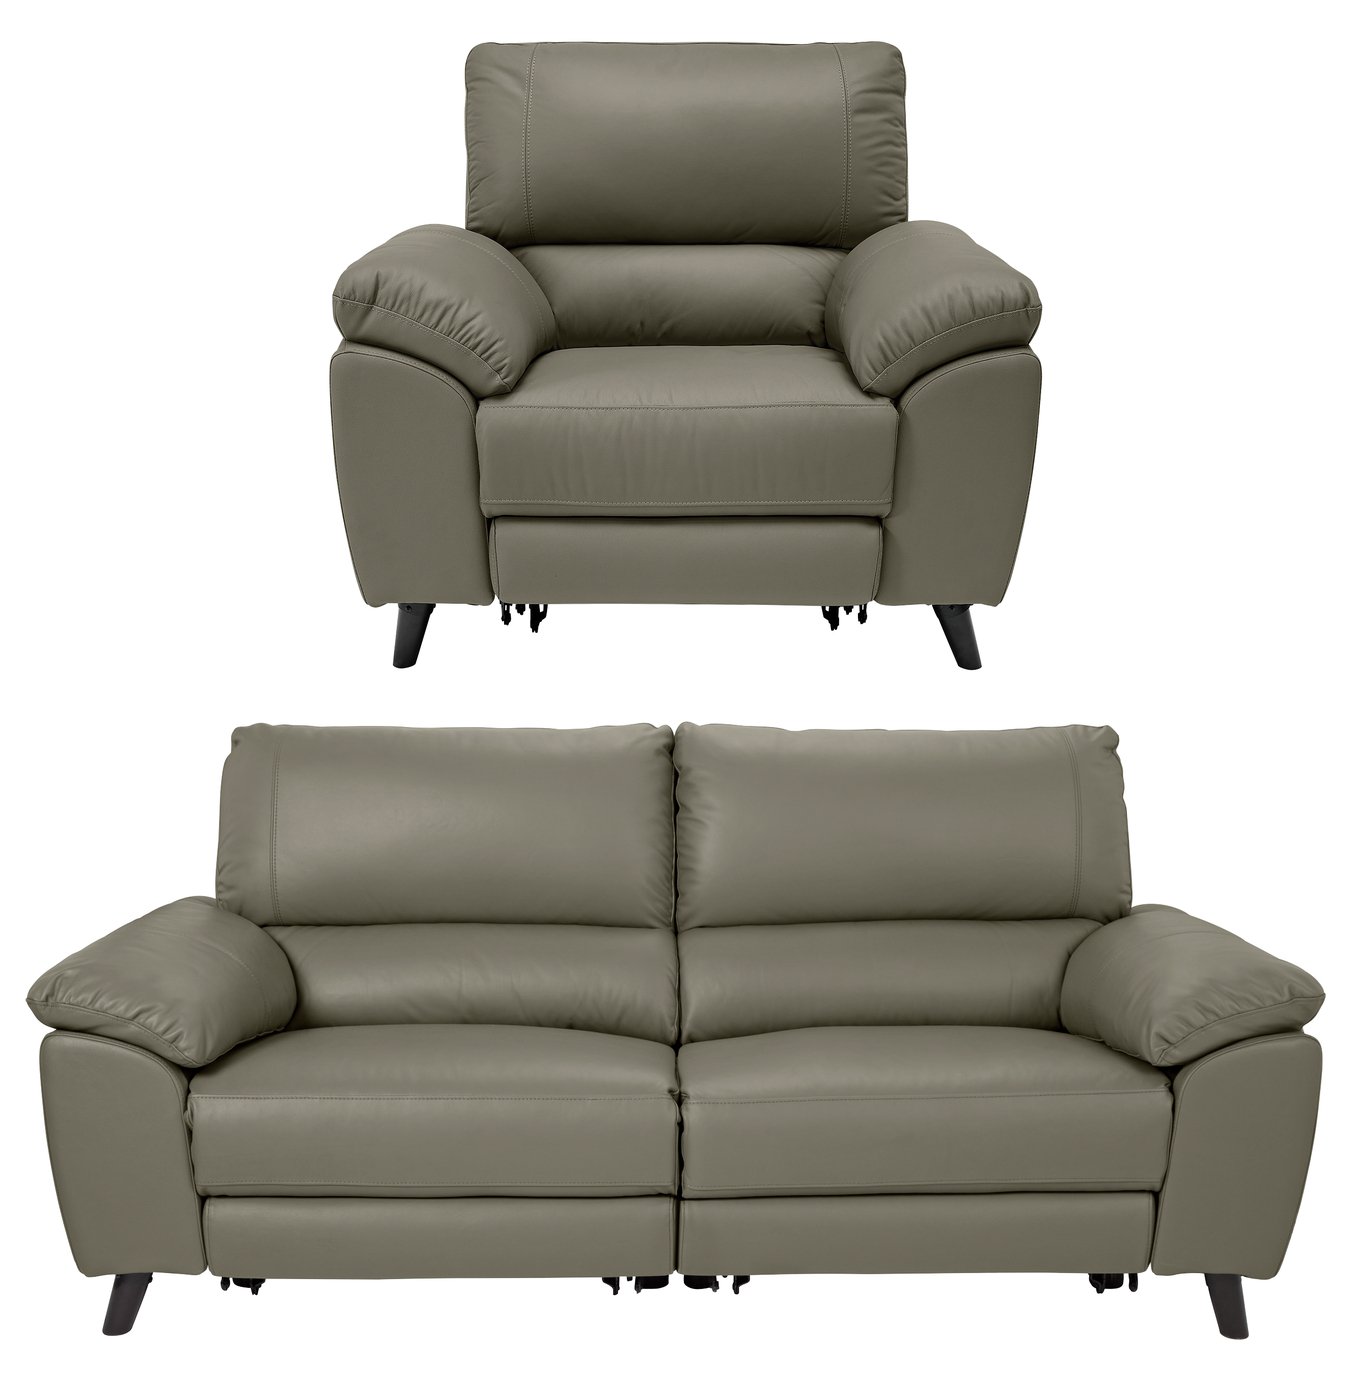 Argos Home Elliot Chair and 3 Seater Recliner Sofa - Grey